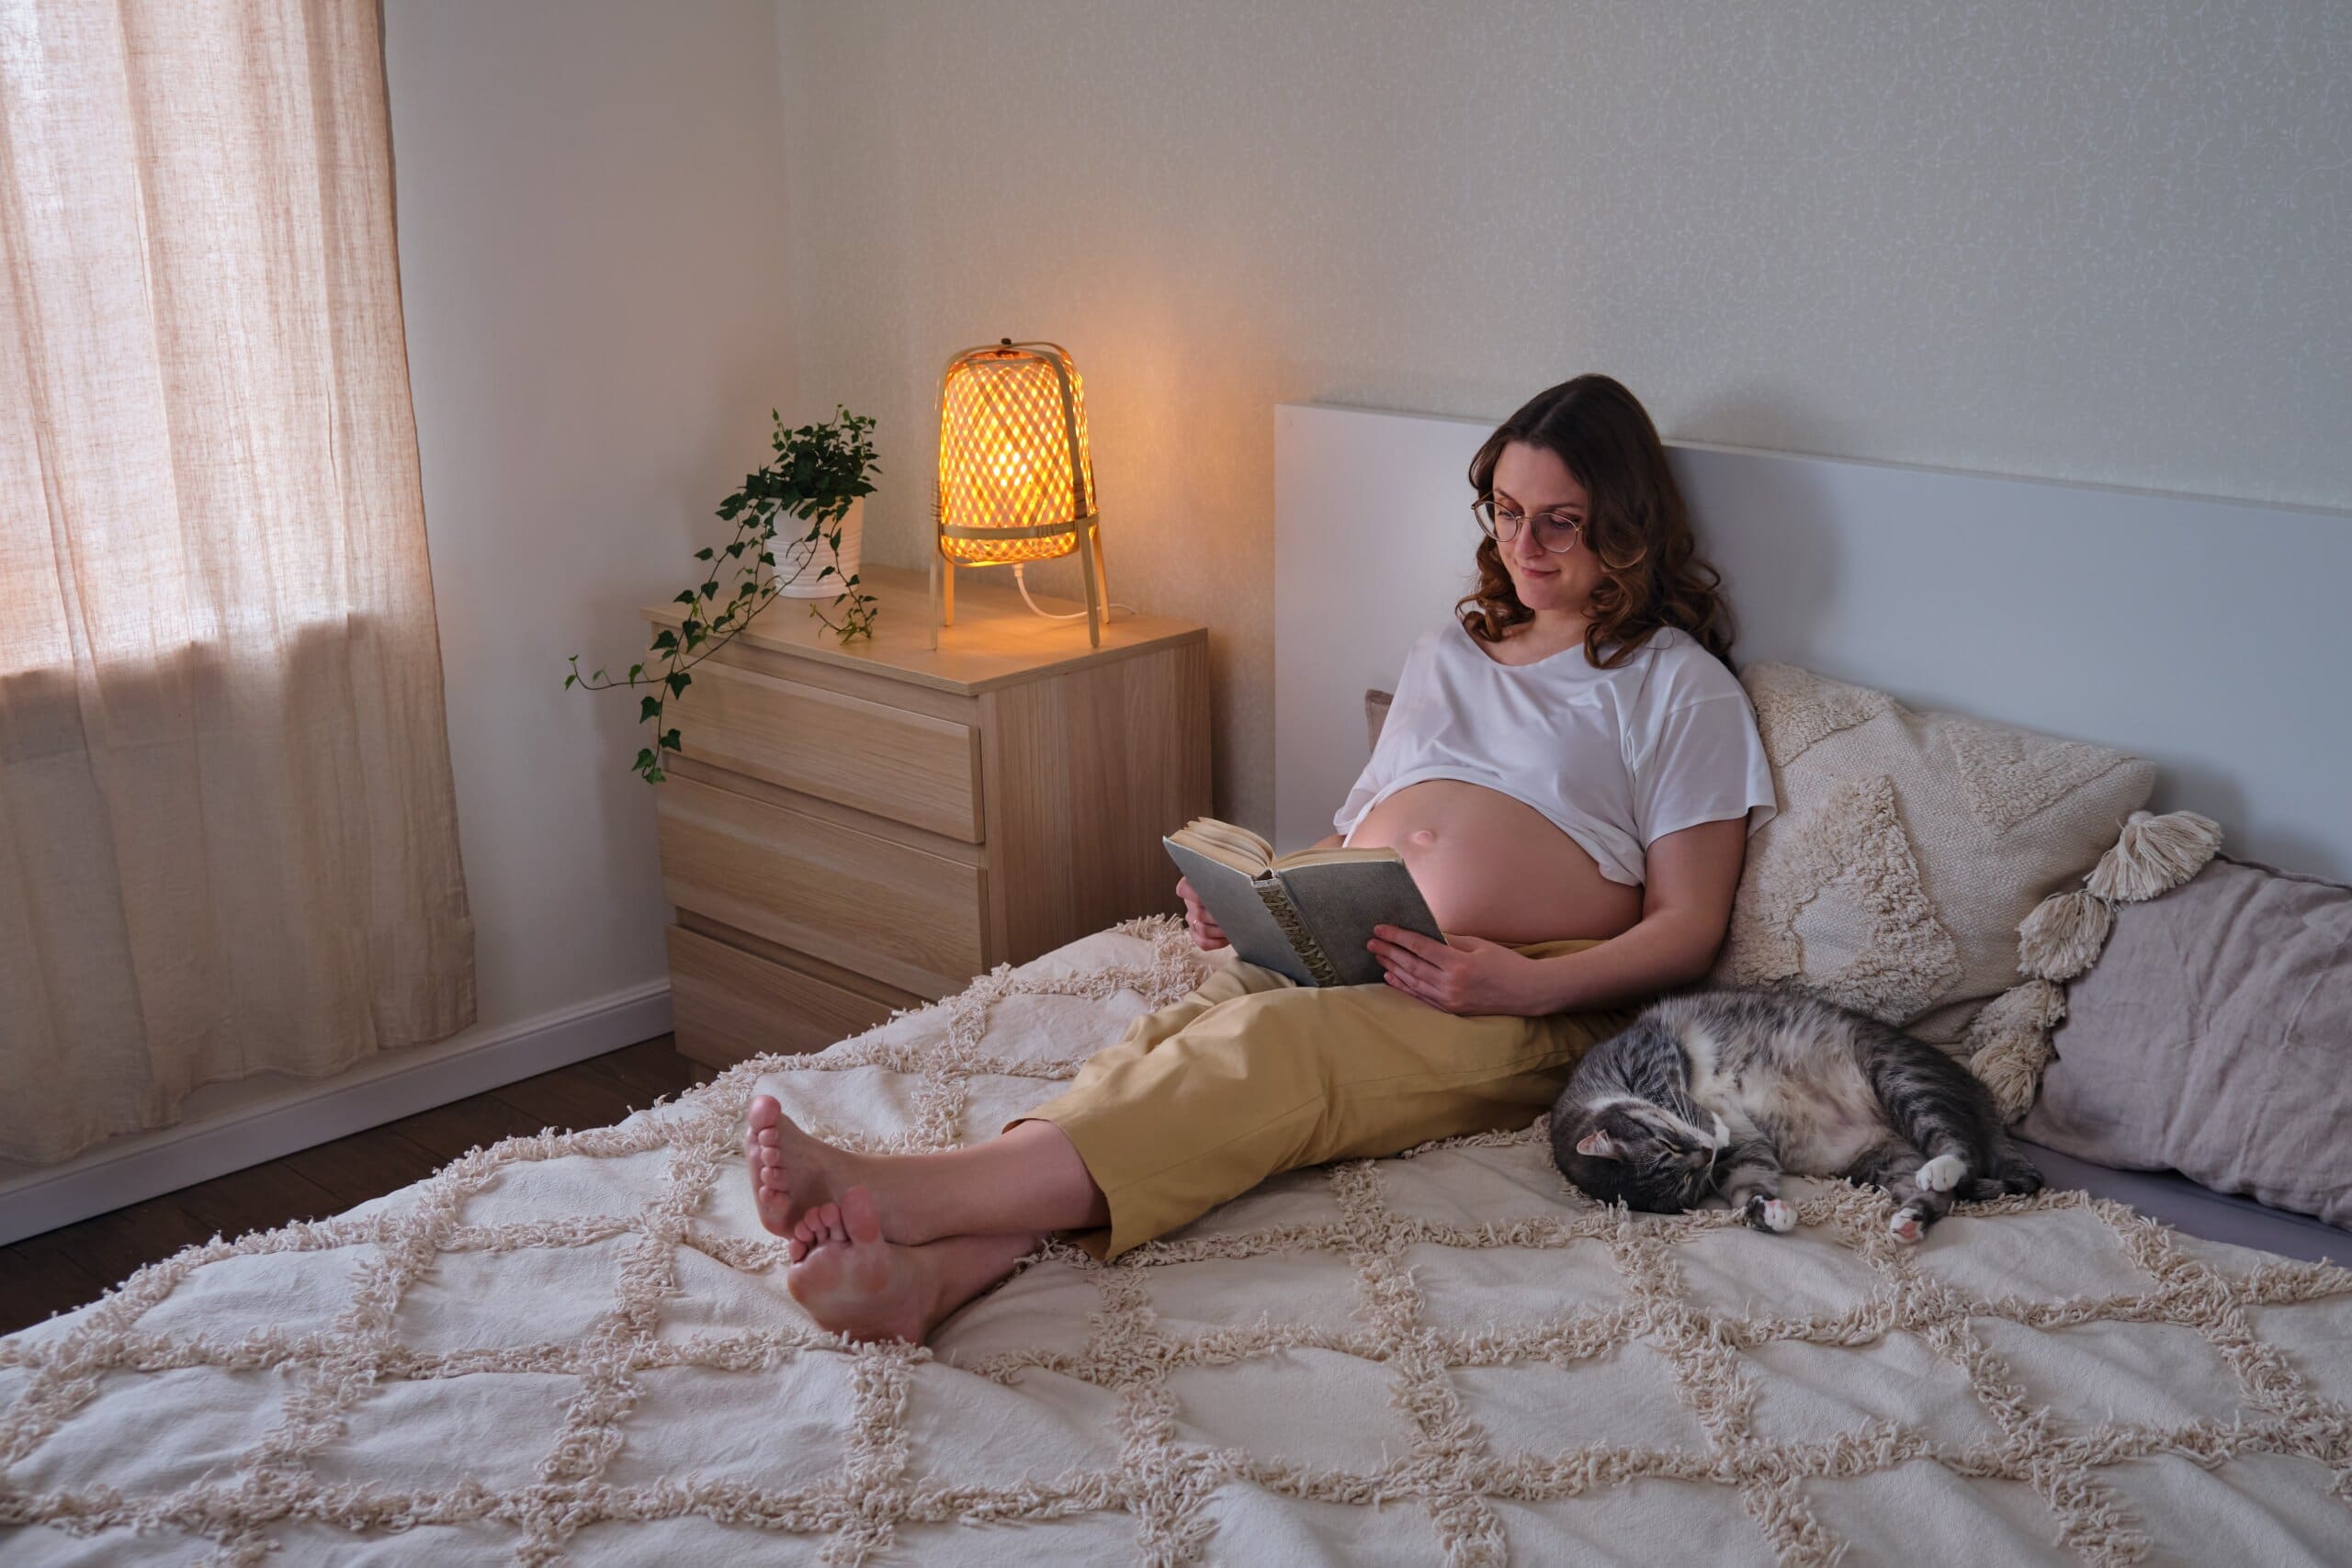 Pregnant lady reading a book in bed with a sleeping cat next to her.